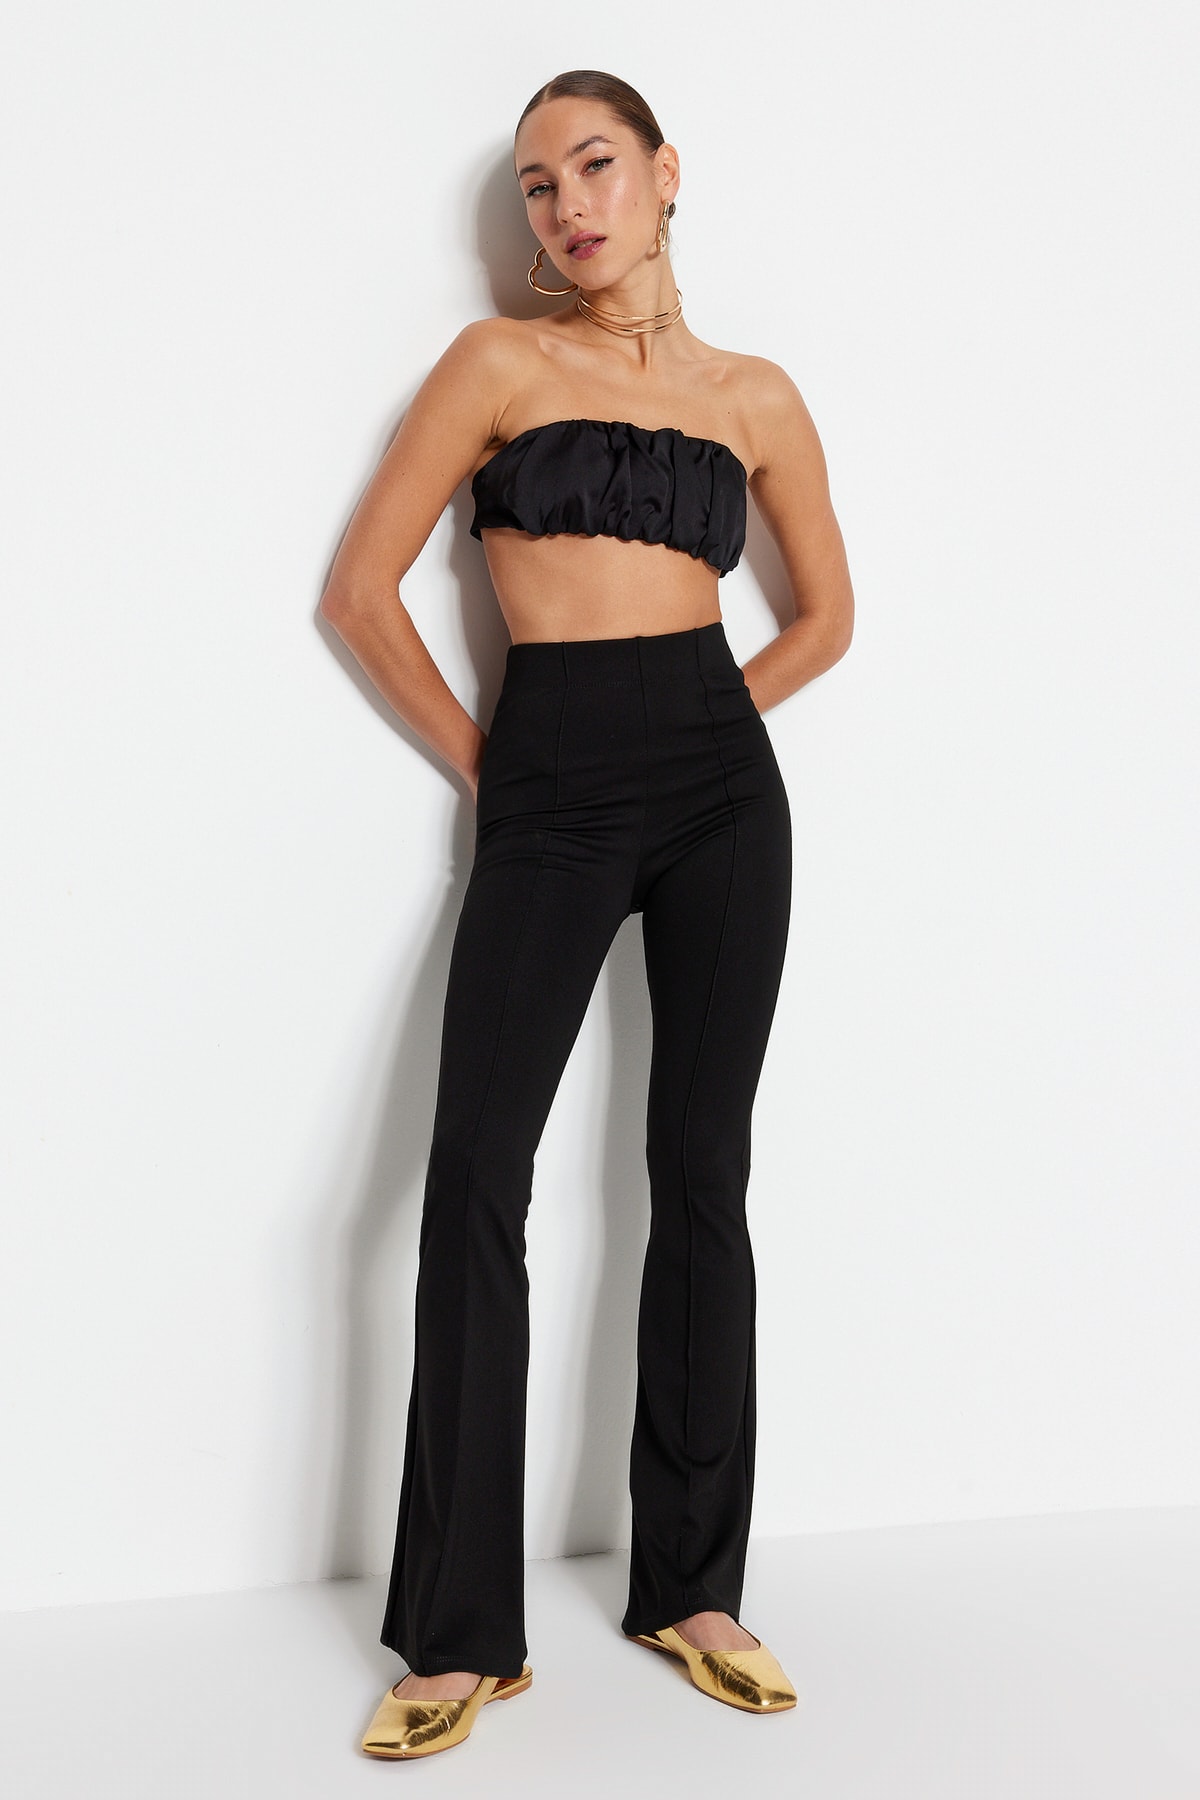 Trendyol Collection Pants - Black - Flare